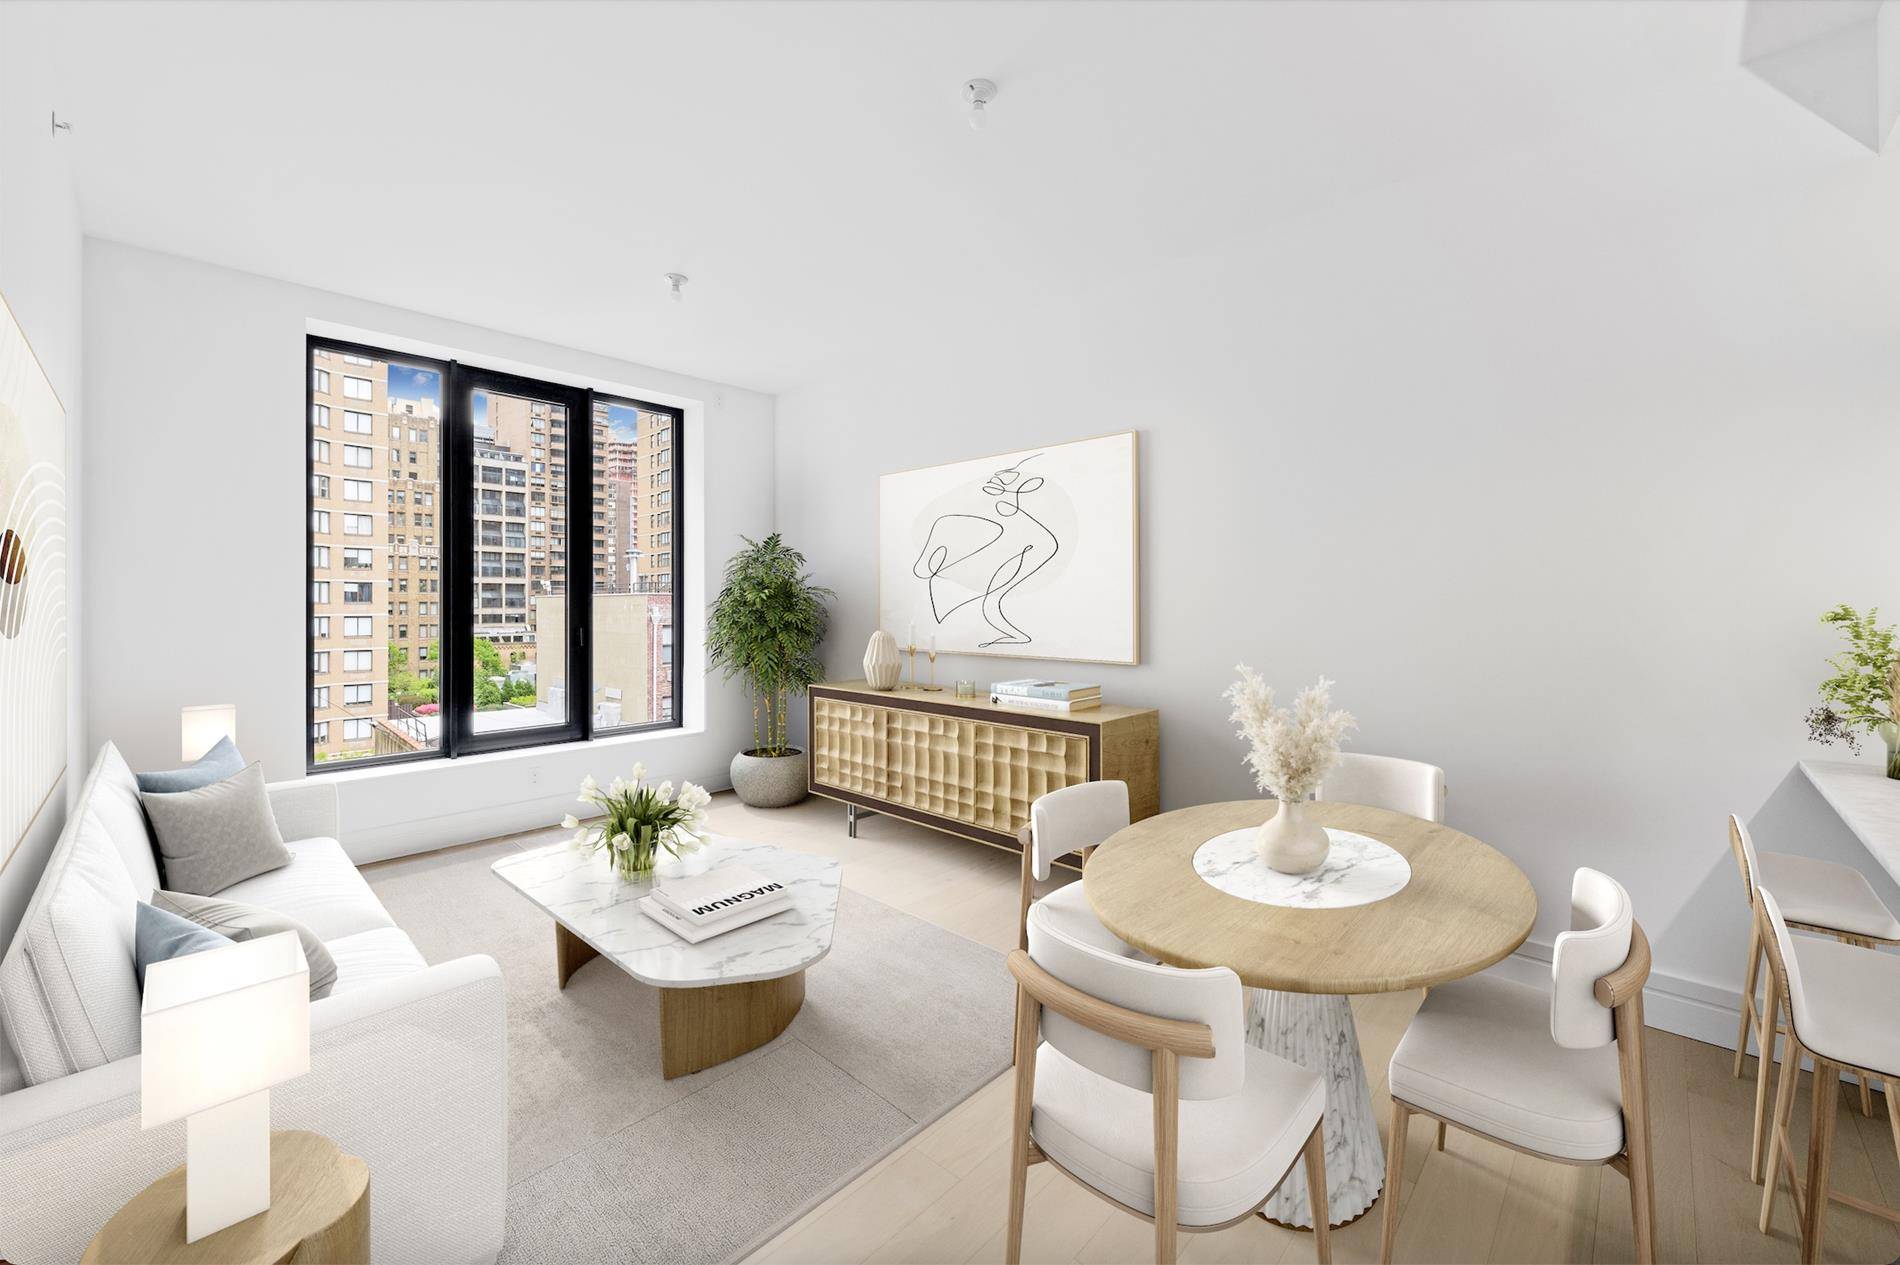 A brand new Kips Bay condo saturated with natural light, this inviting 1 bedroom, 1 bathroom home is an effortless blend of classic city elegance and contemporary design.